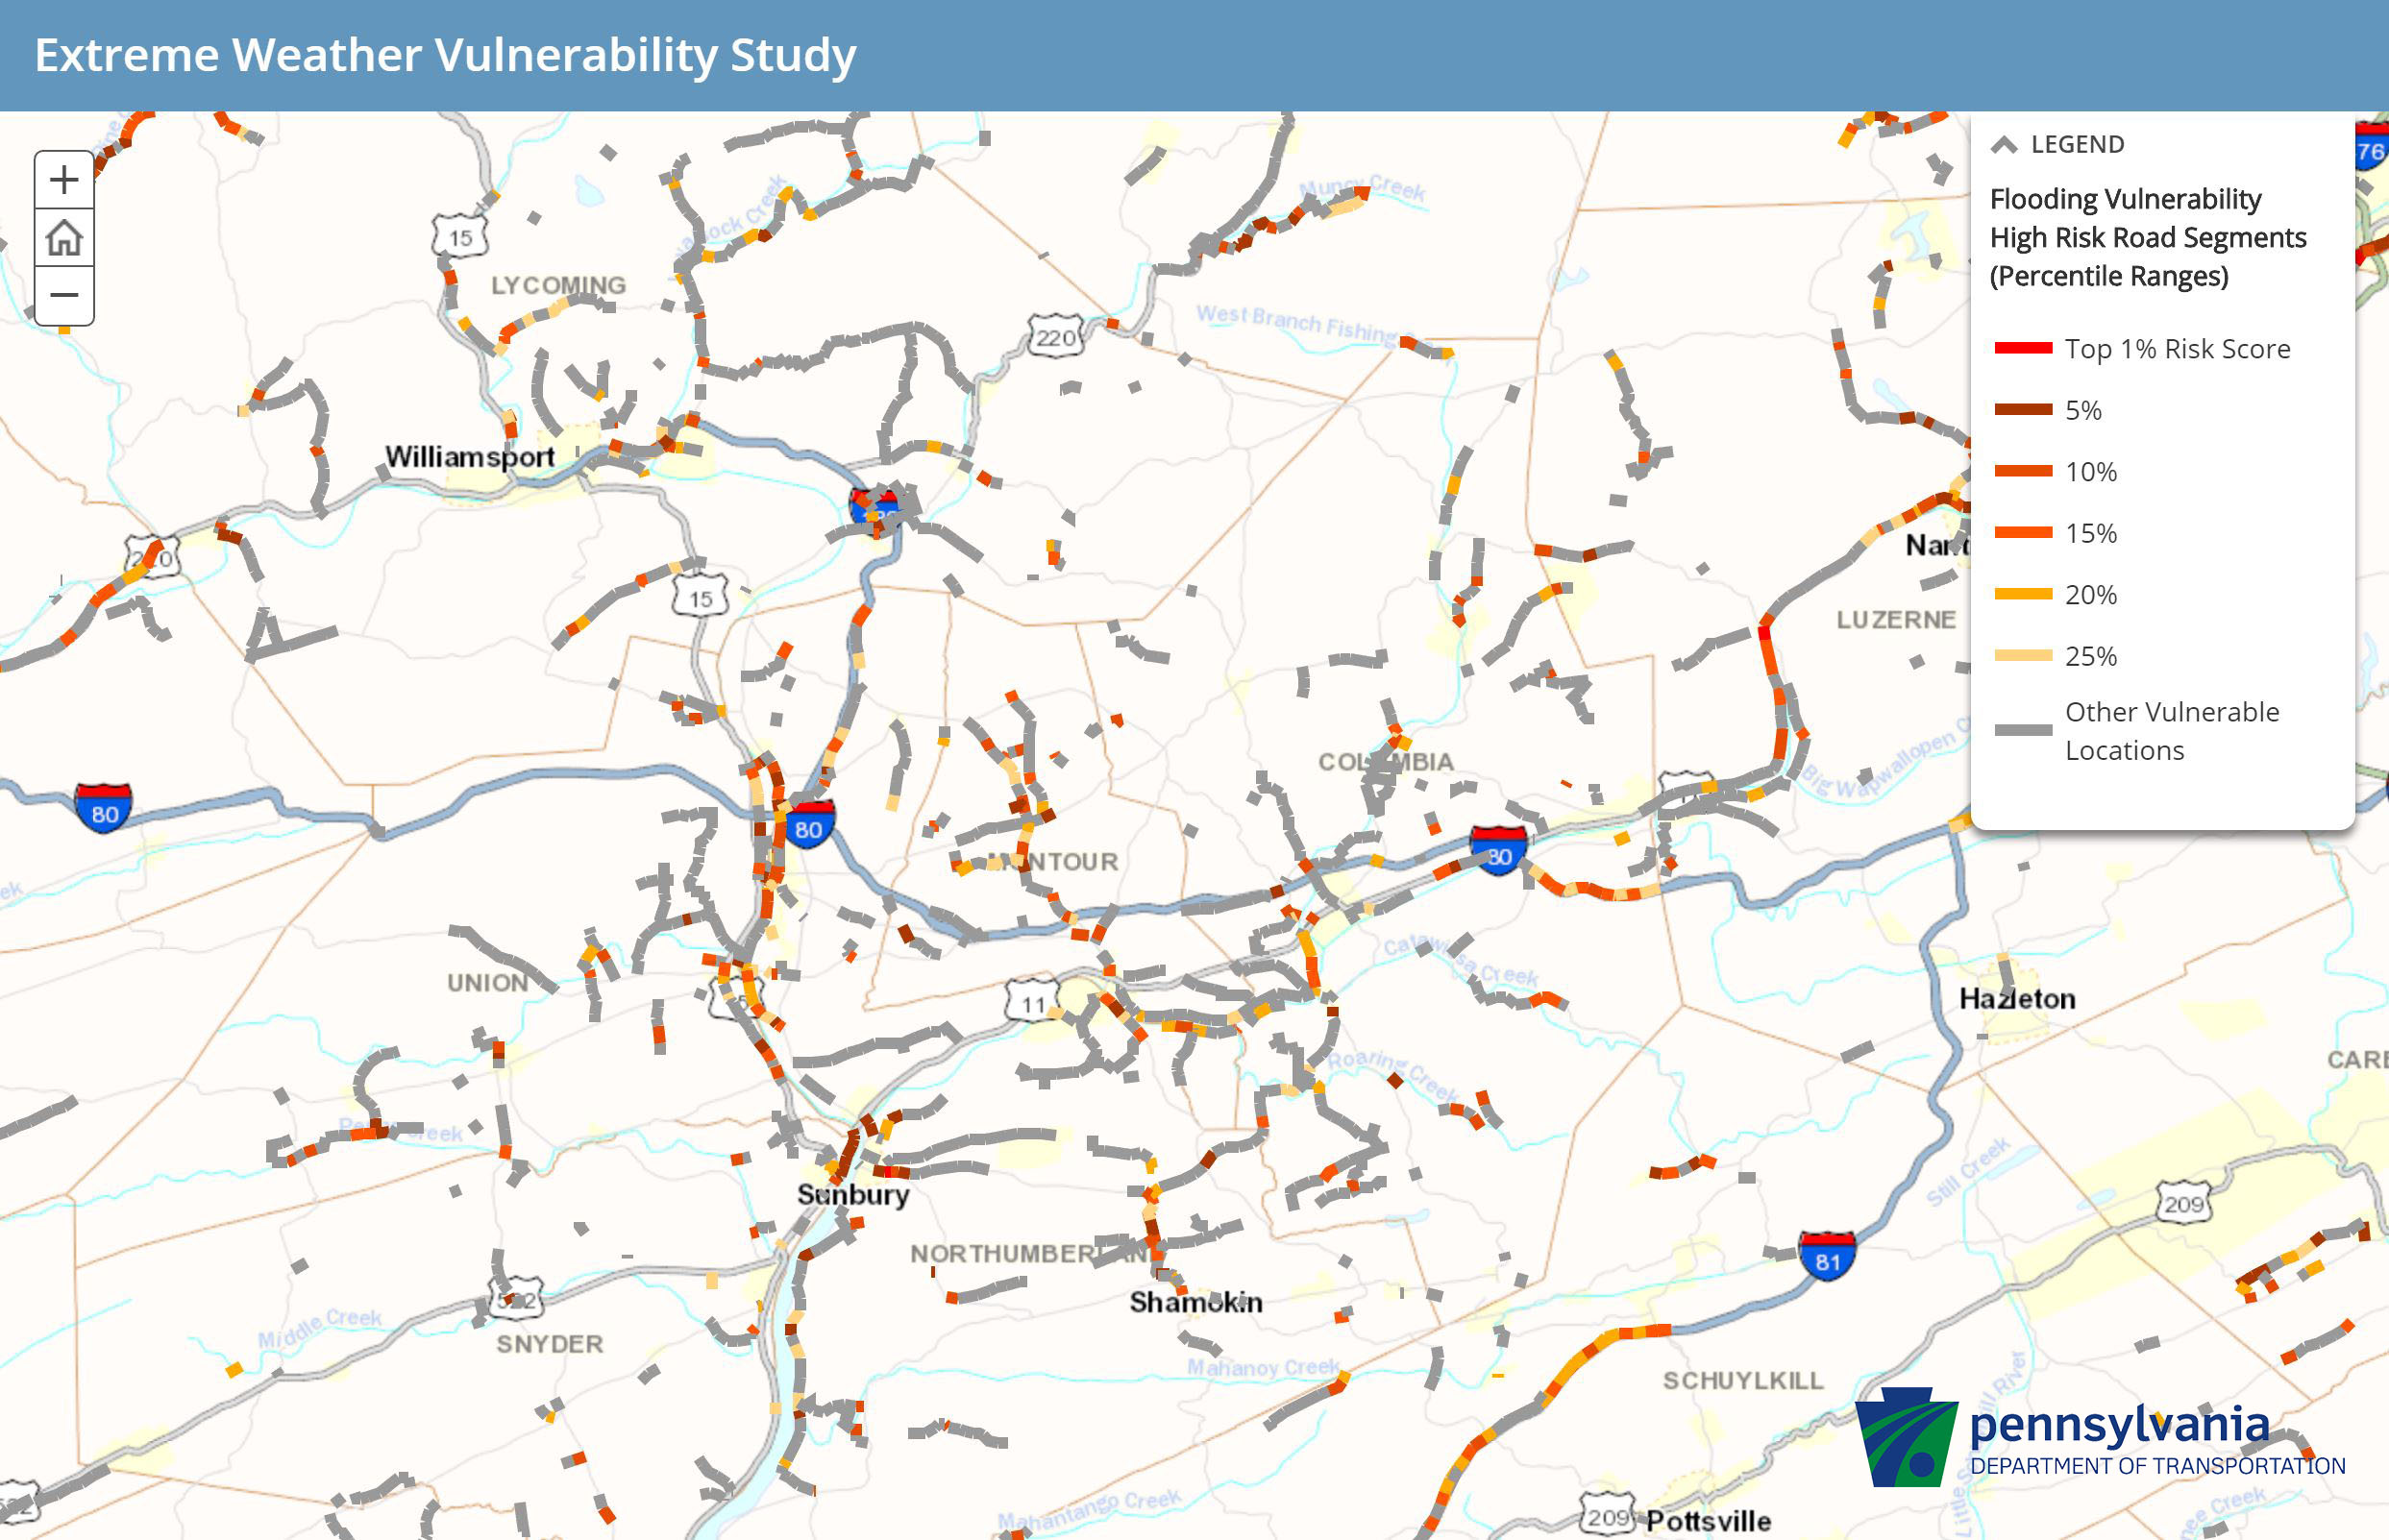 screenshot of extreme weather vulnerability map